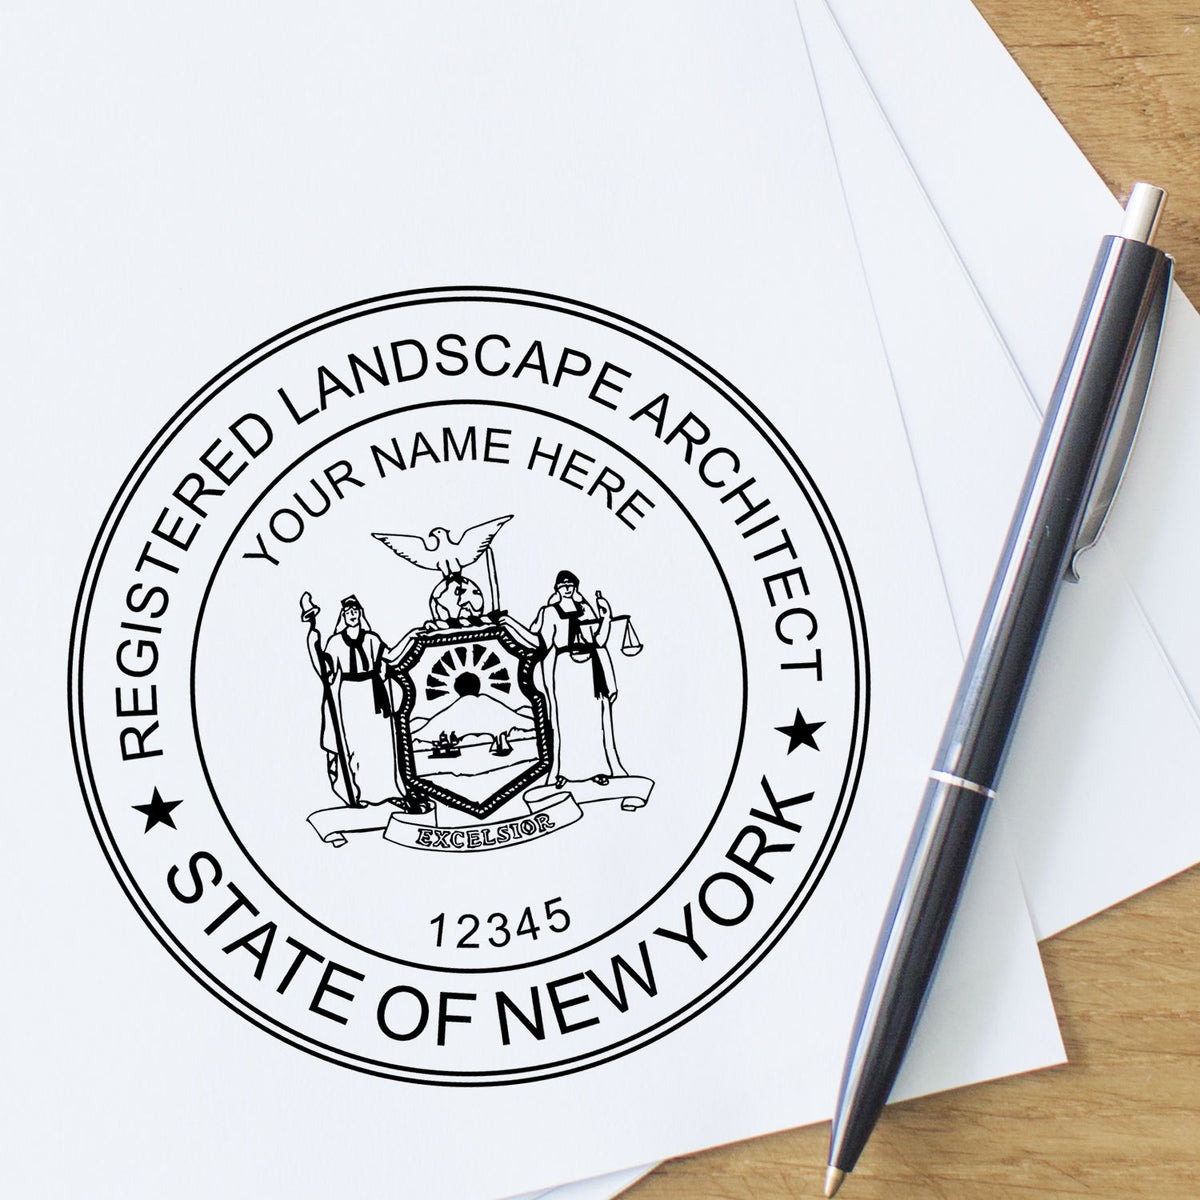 A lifestyle photo showing a stamped image of the Digital New York Landscape Architect Stamp on a piece of paper